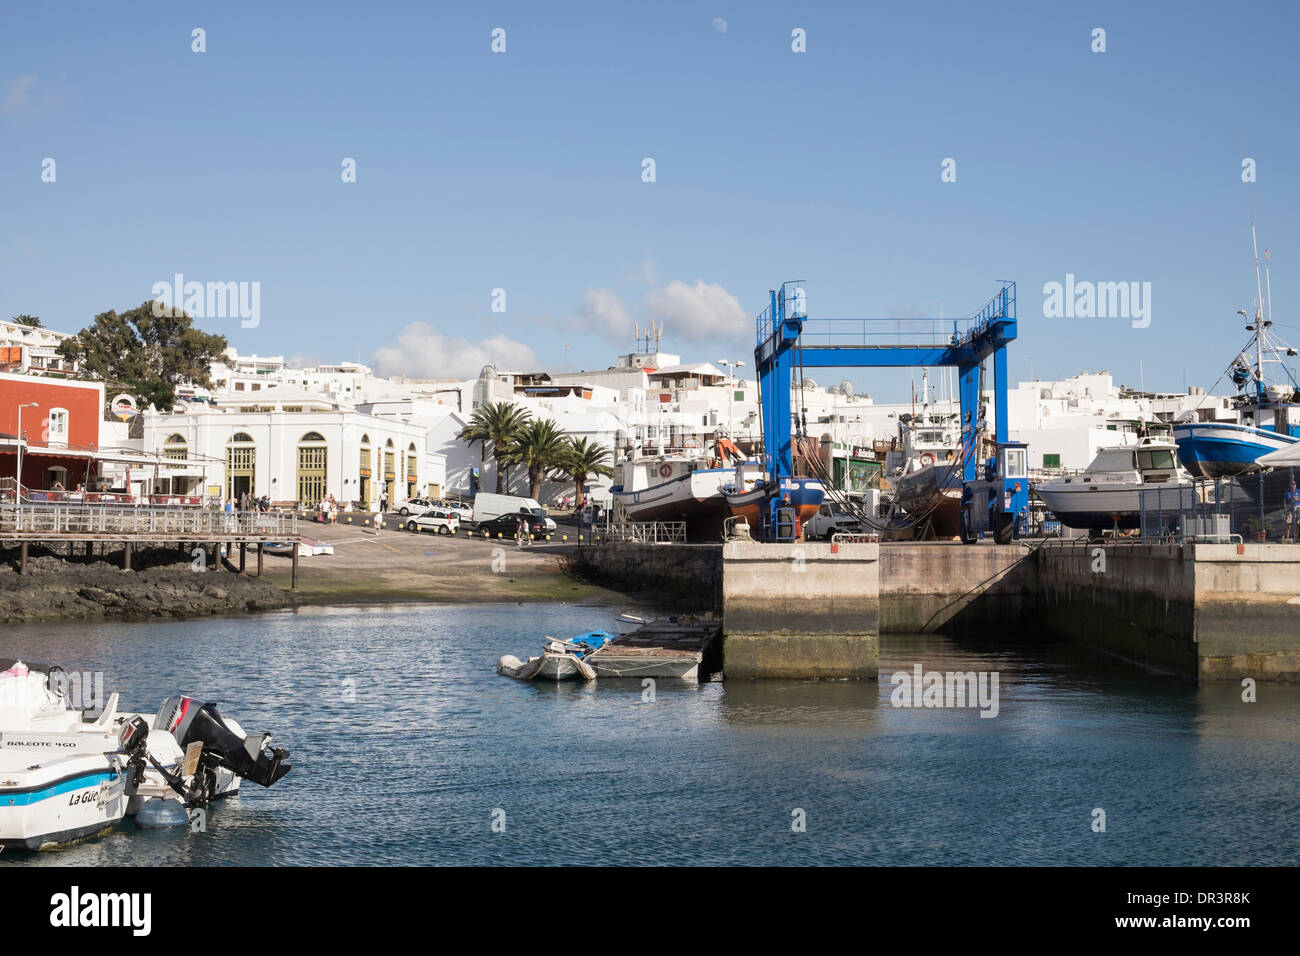 Offshore view from the port in Puerto del Carmen, Lanzarote, Canary Islands, Spain Stock Photo